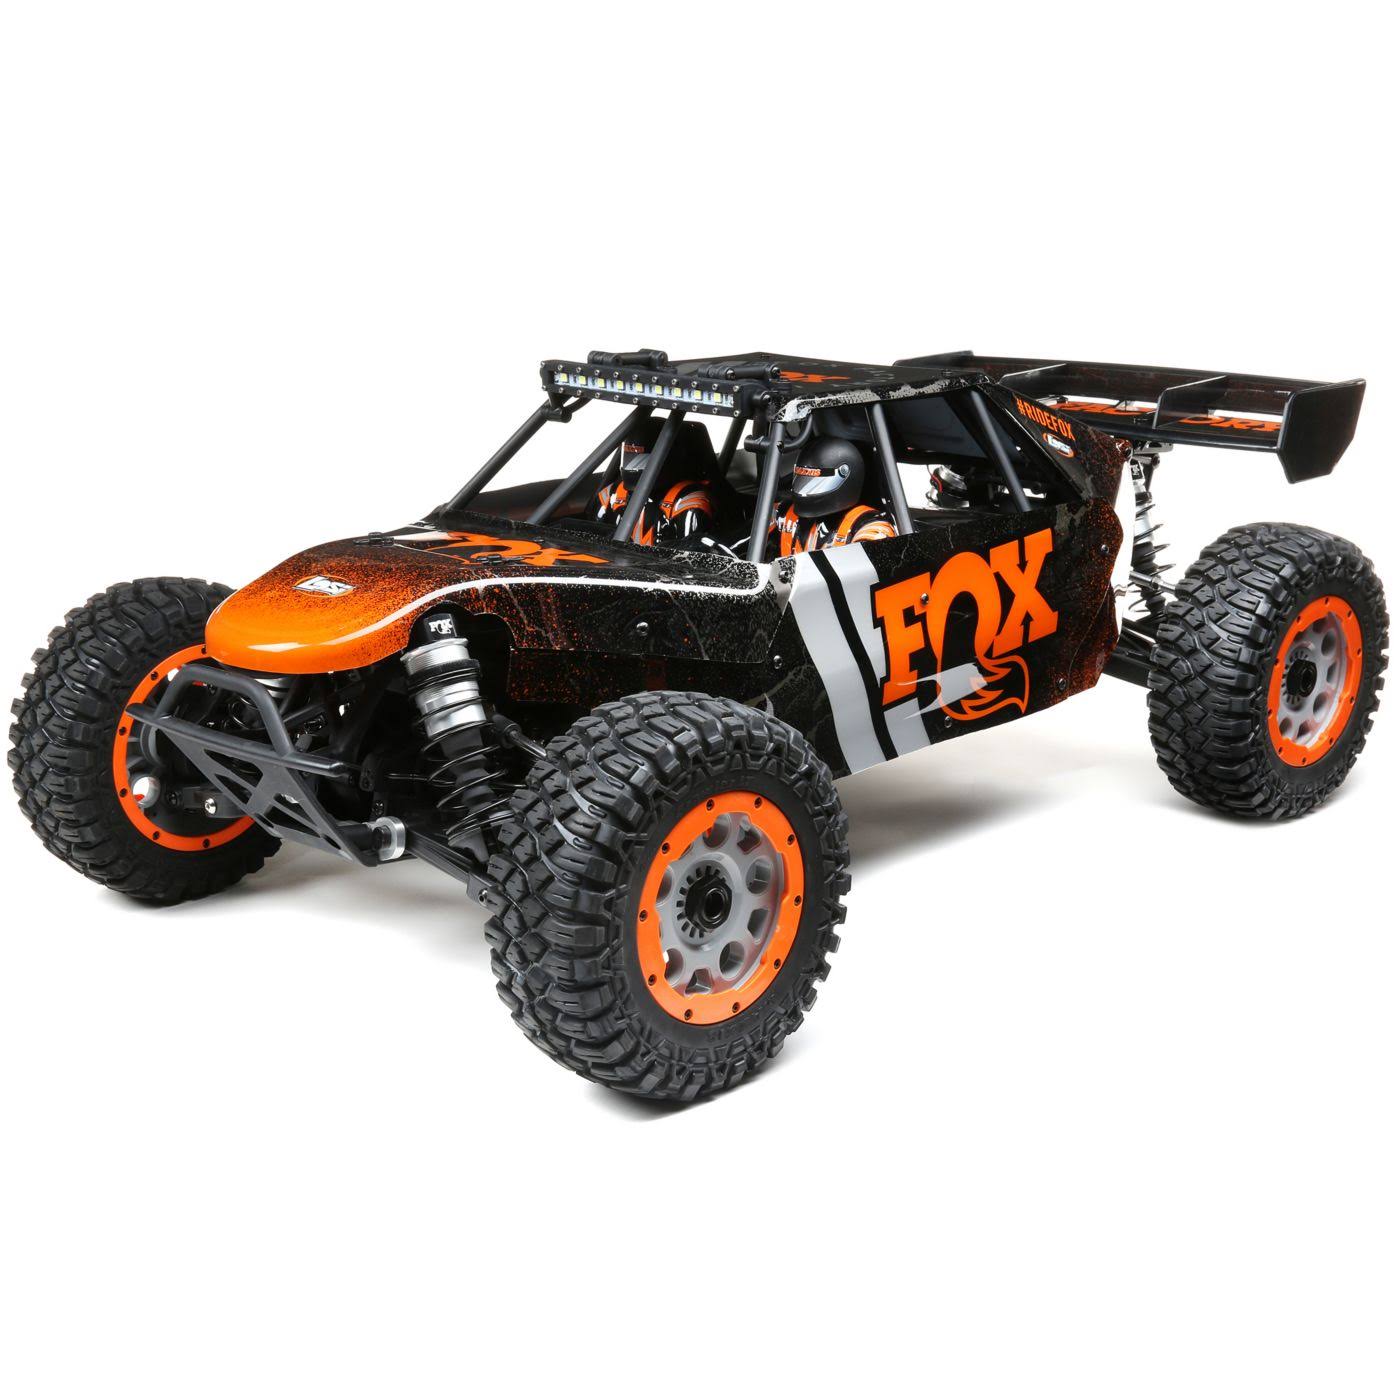 Losi RC Truck 1/5 DBXL-E 2.0 4WD Desert Buggy Brushless RTR (Battery and Charger Not Included) with Smart, Fox, LOS05020V2T1